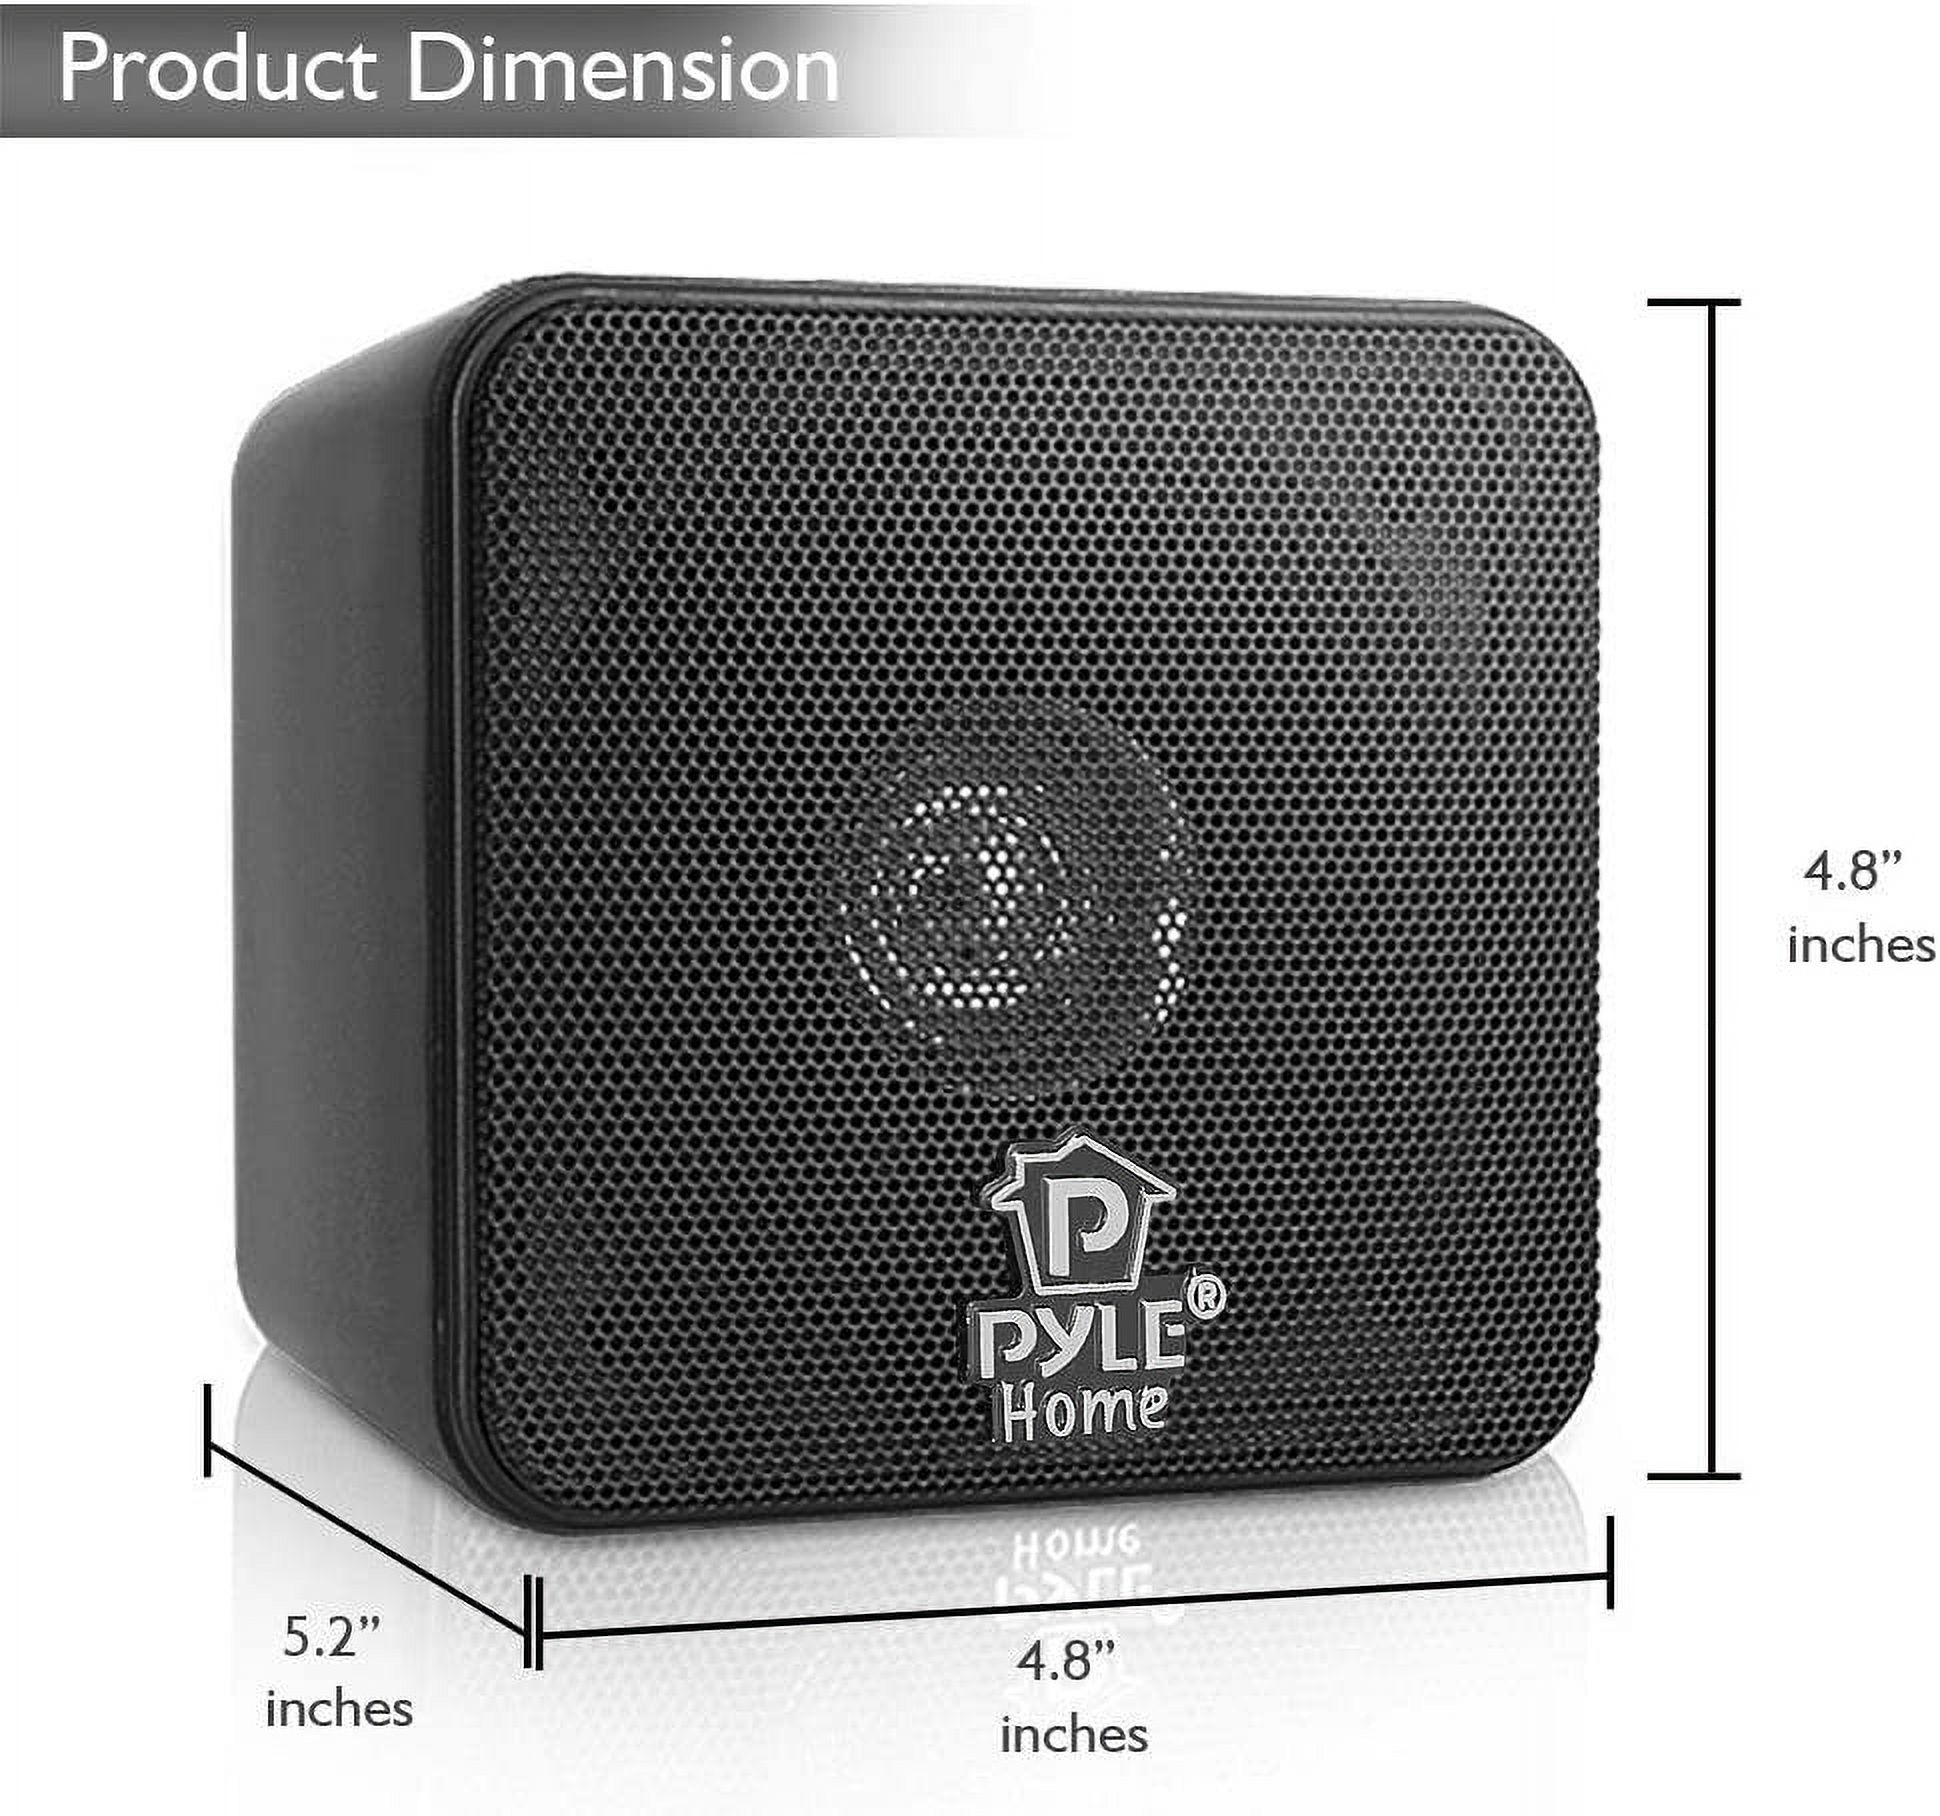 Pyle Home 4 Mini Cube Bookshelf Speakers-Paper Cone Driver, 200 Watt Power, 8 Ohm Impedance, Video Shielding, Home Theater Application and Audio Stereo Surround Sound System - 1 Pair -PCB4BK (Black) - image 2 of 6